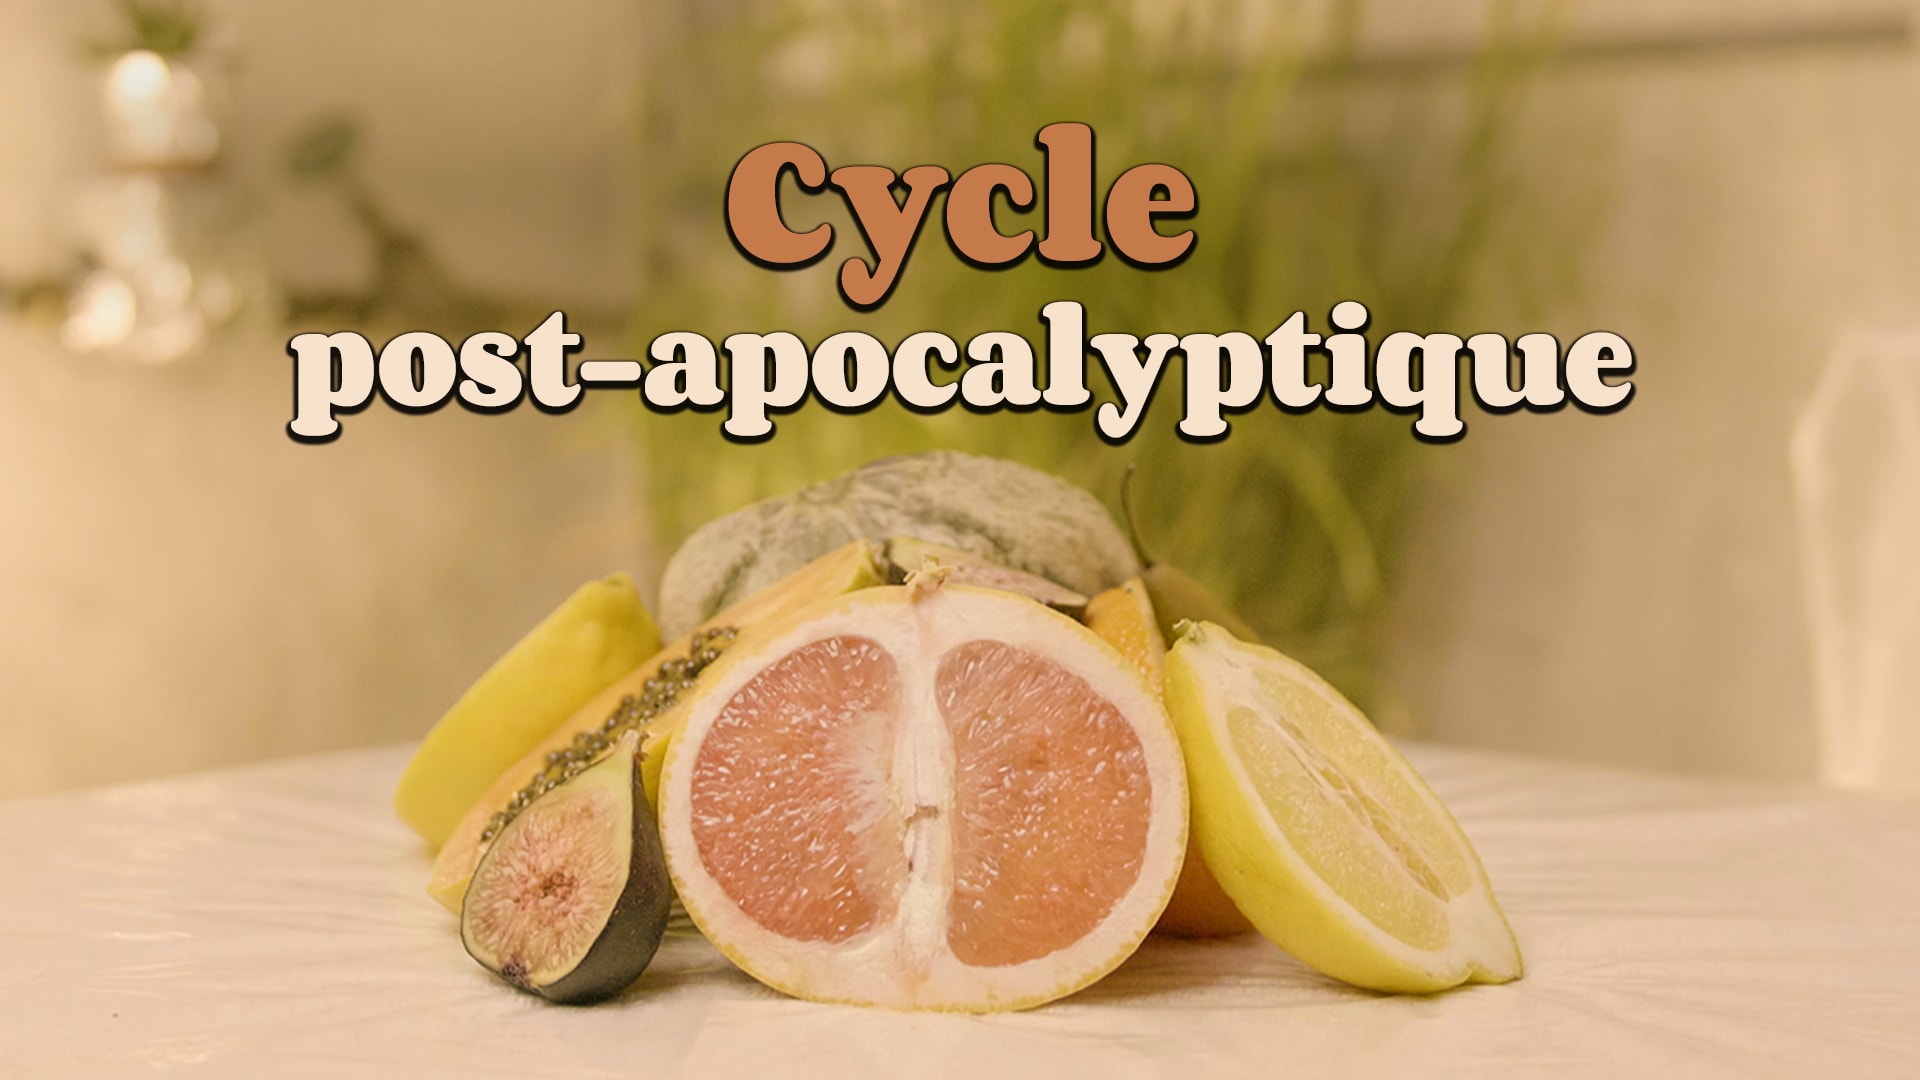 Cycle post-apocalyptique